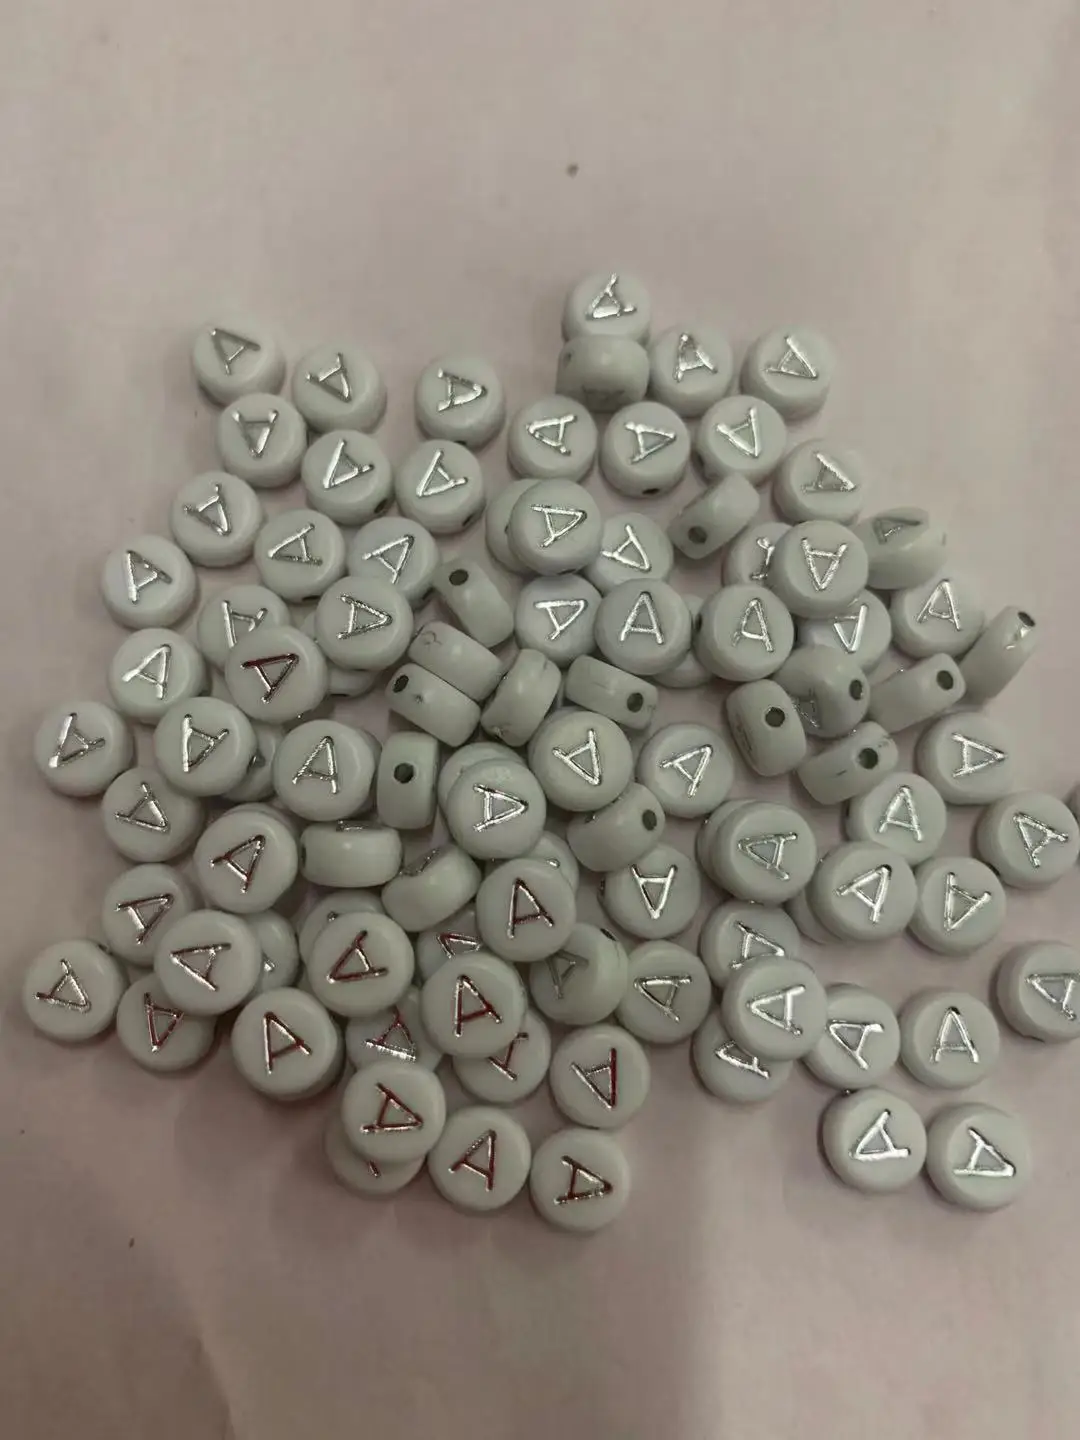 CHONGAI 100Pcs Oblate Acrylic Letter Beads Single Alphabet White Silver Letter Round Bracelet Jewelry Beads&Jewelry Making 4*7MM